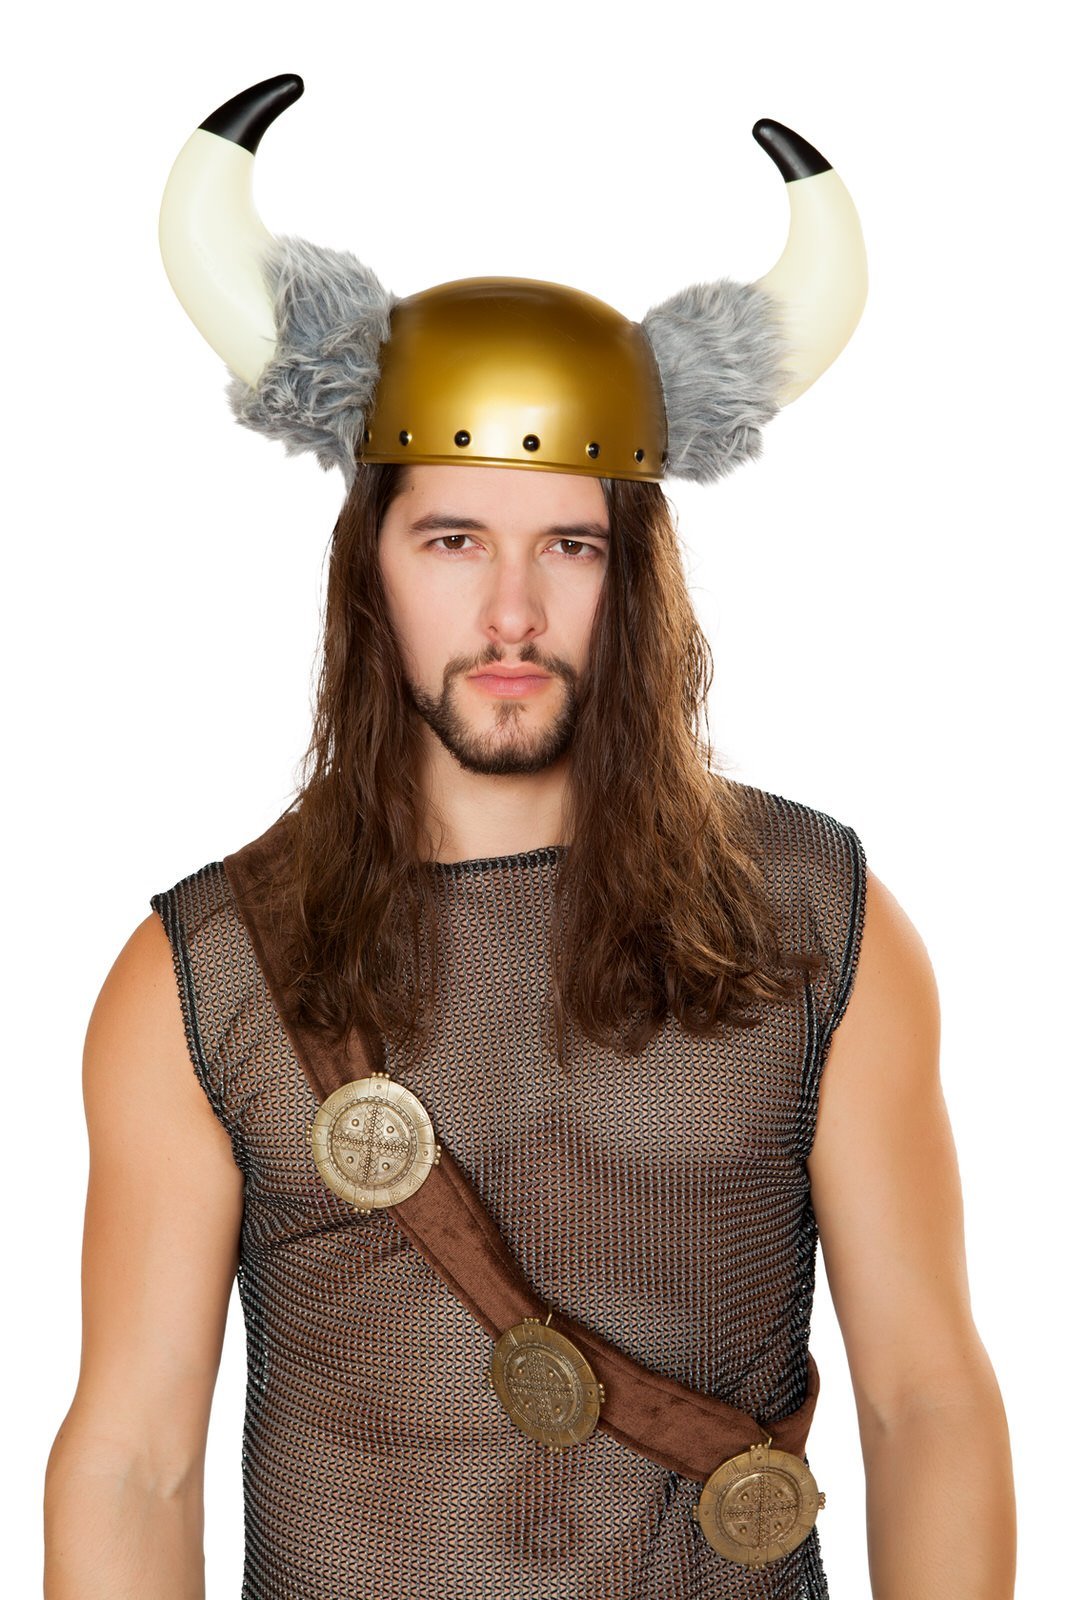 Buy Viking Hat with Faux Fur Detail from RomaRetailShop for 11.25 with Same Day Shipping Designed by Roma Costume 4798-AS-O/S